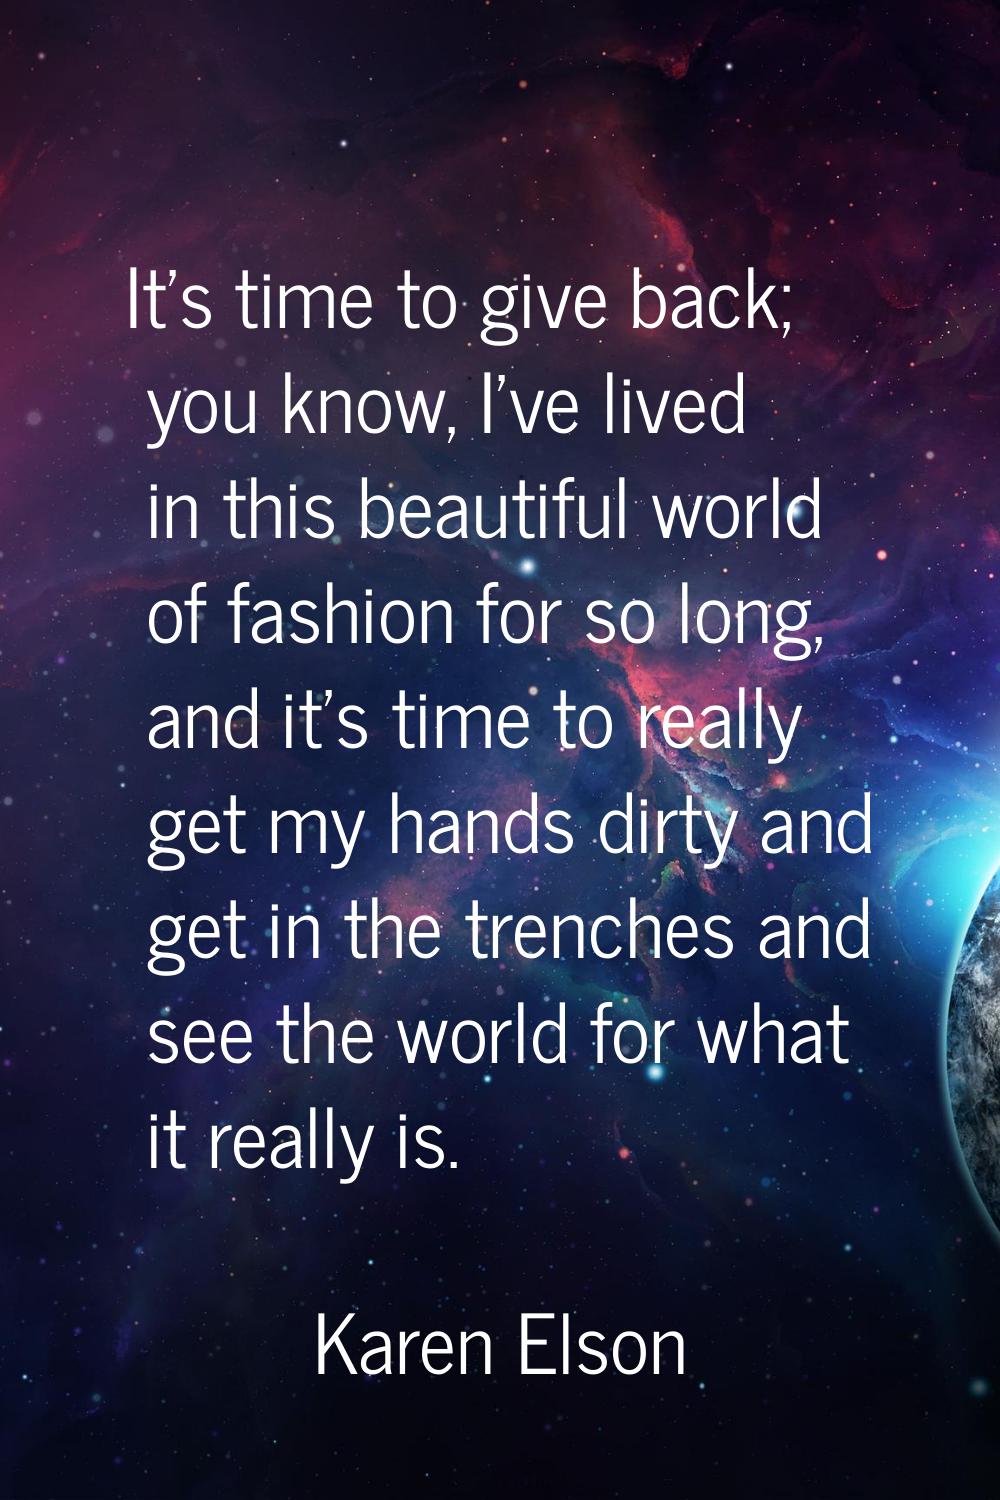 It's time to give back; you know, I've lived in this beautiful world of fashion for so long, and it